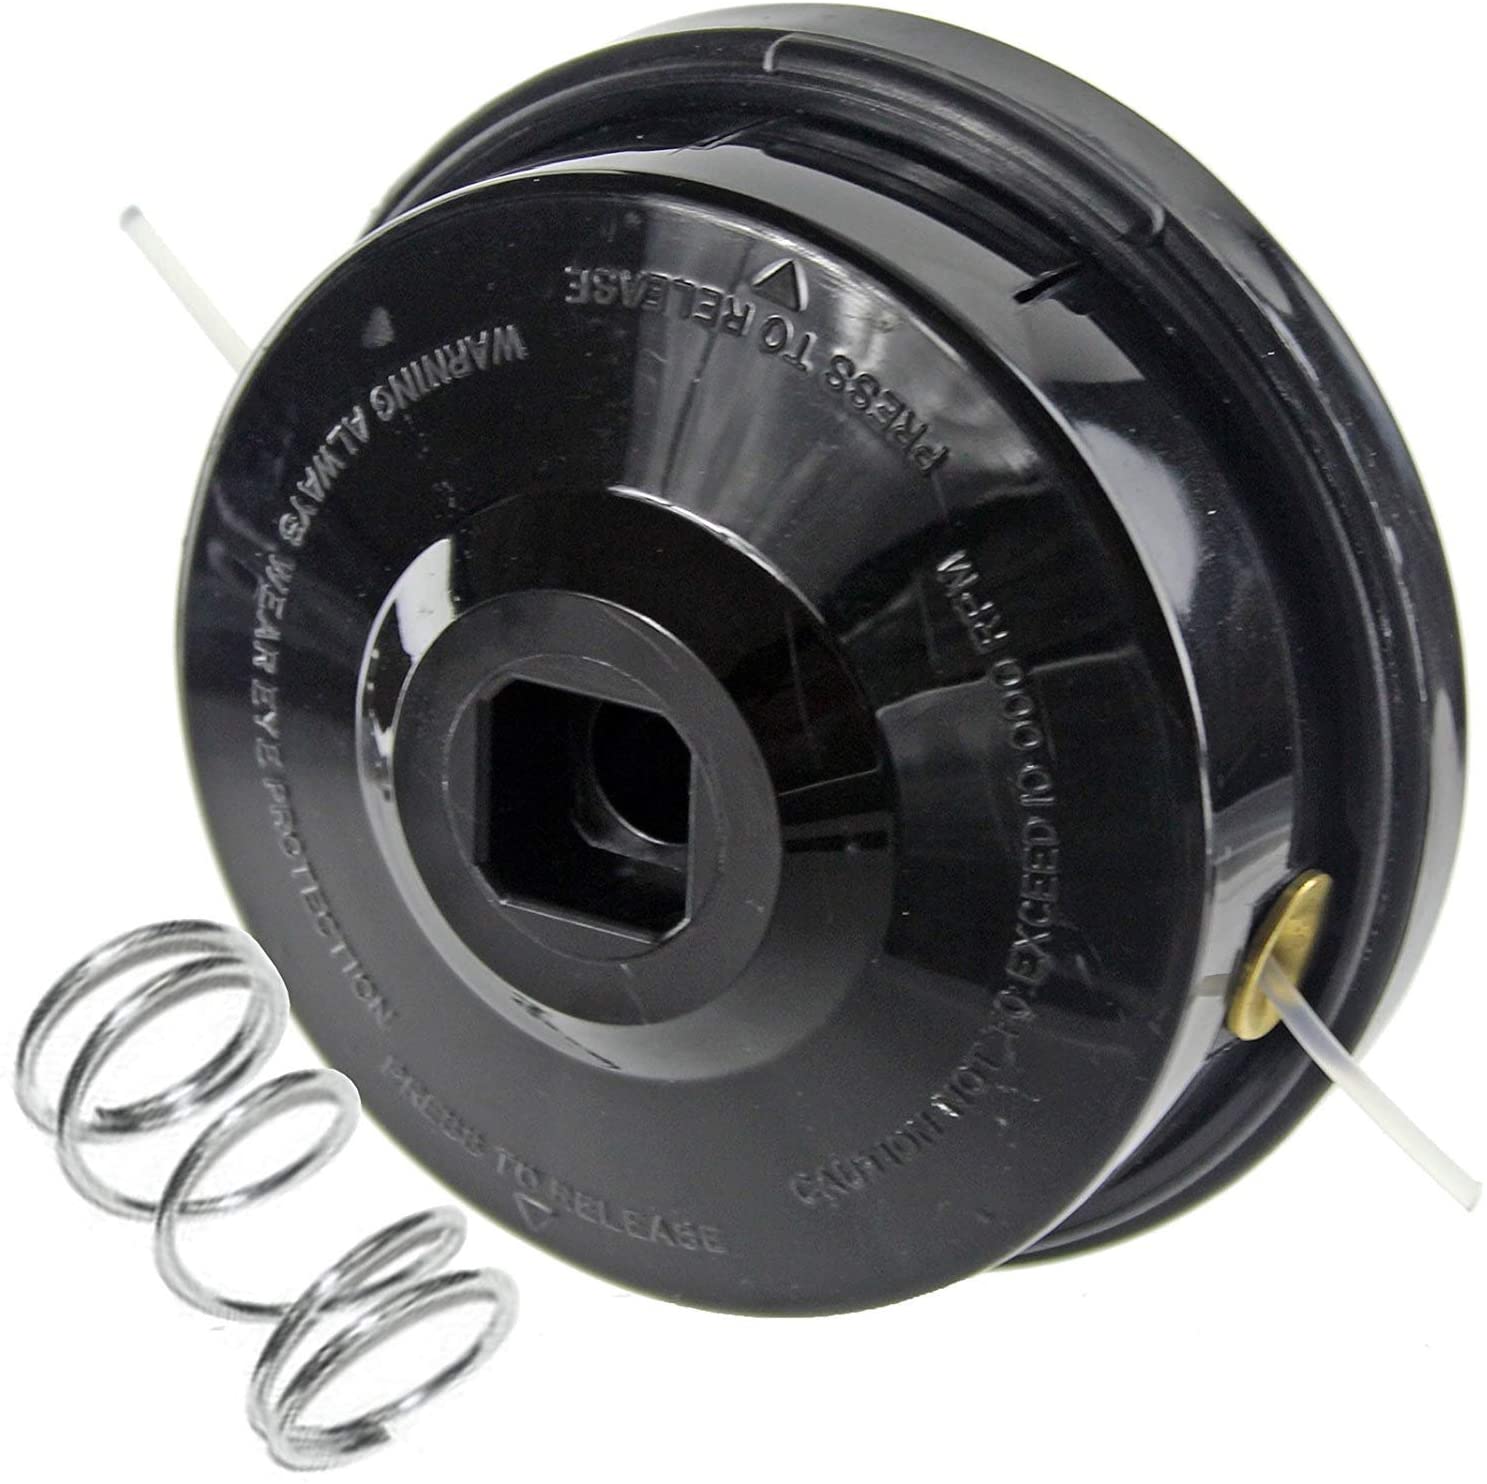 Dual 2 Line Bump Feed Spool Head for KAWASAKI Strimmer Trimmer Brushcutter (Standard Fitting)